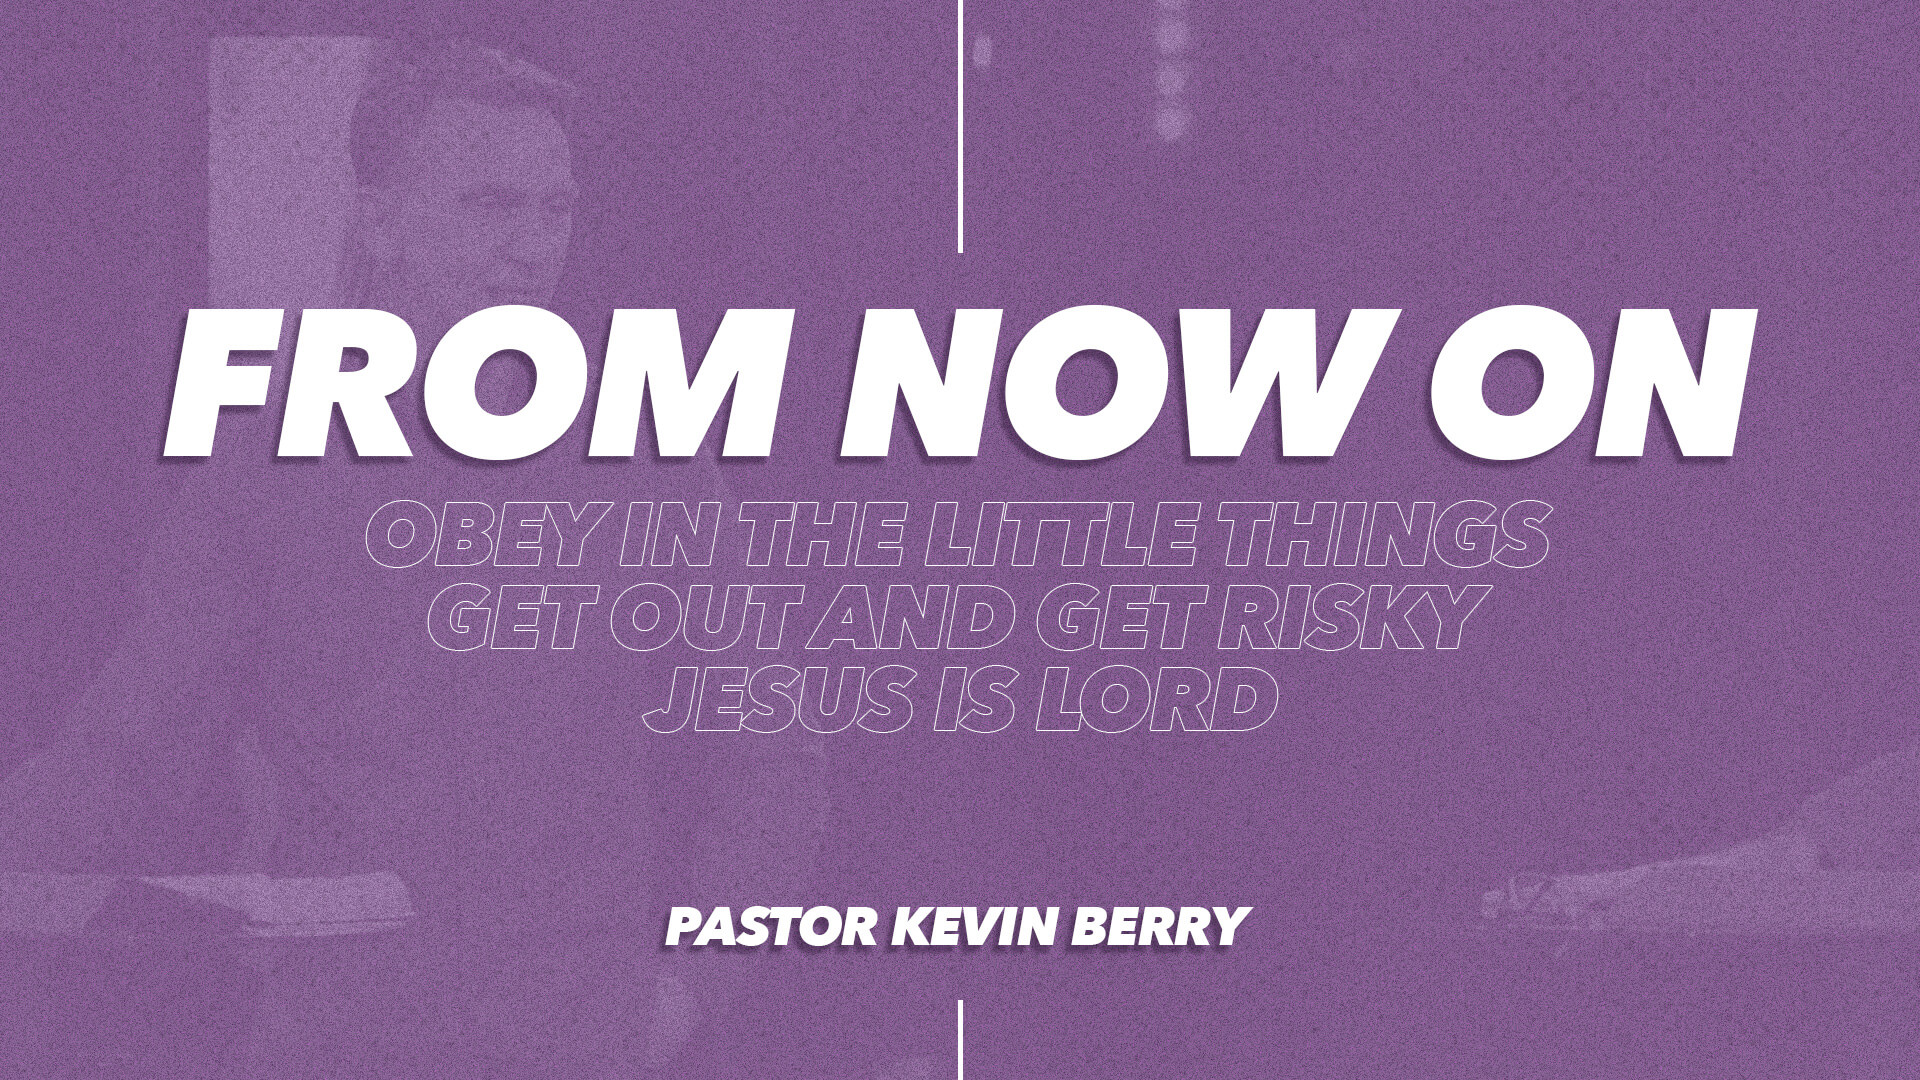 From Now On by Pastor Kevin Berry